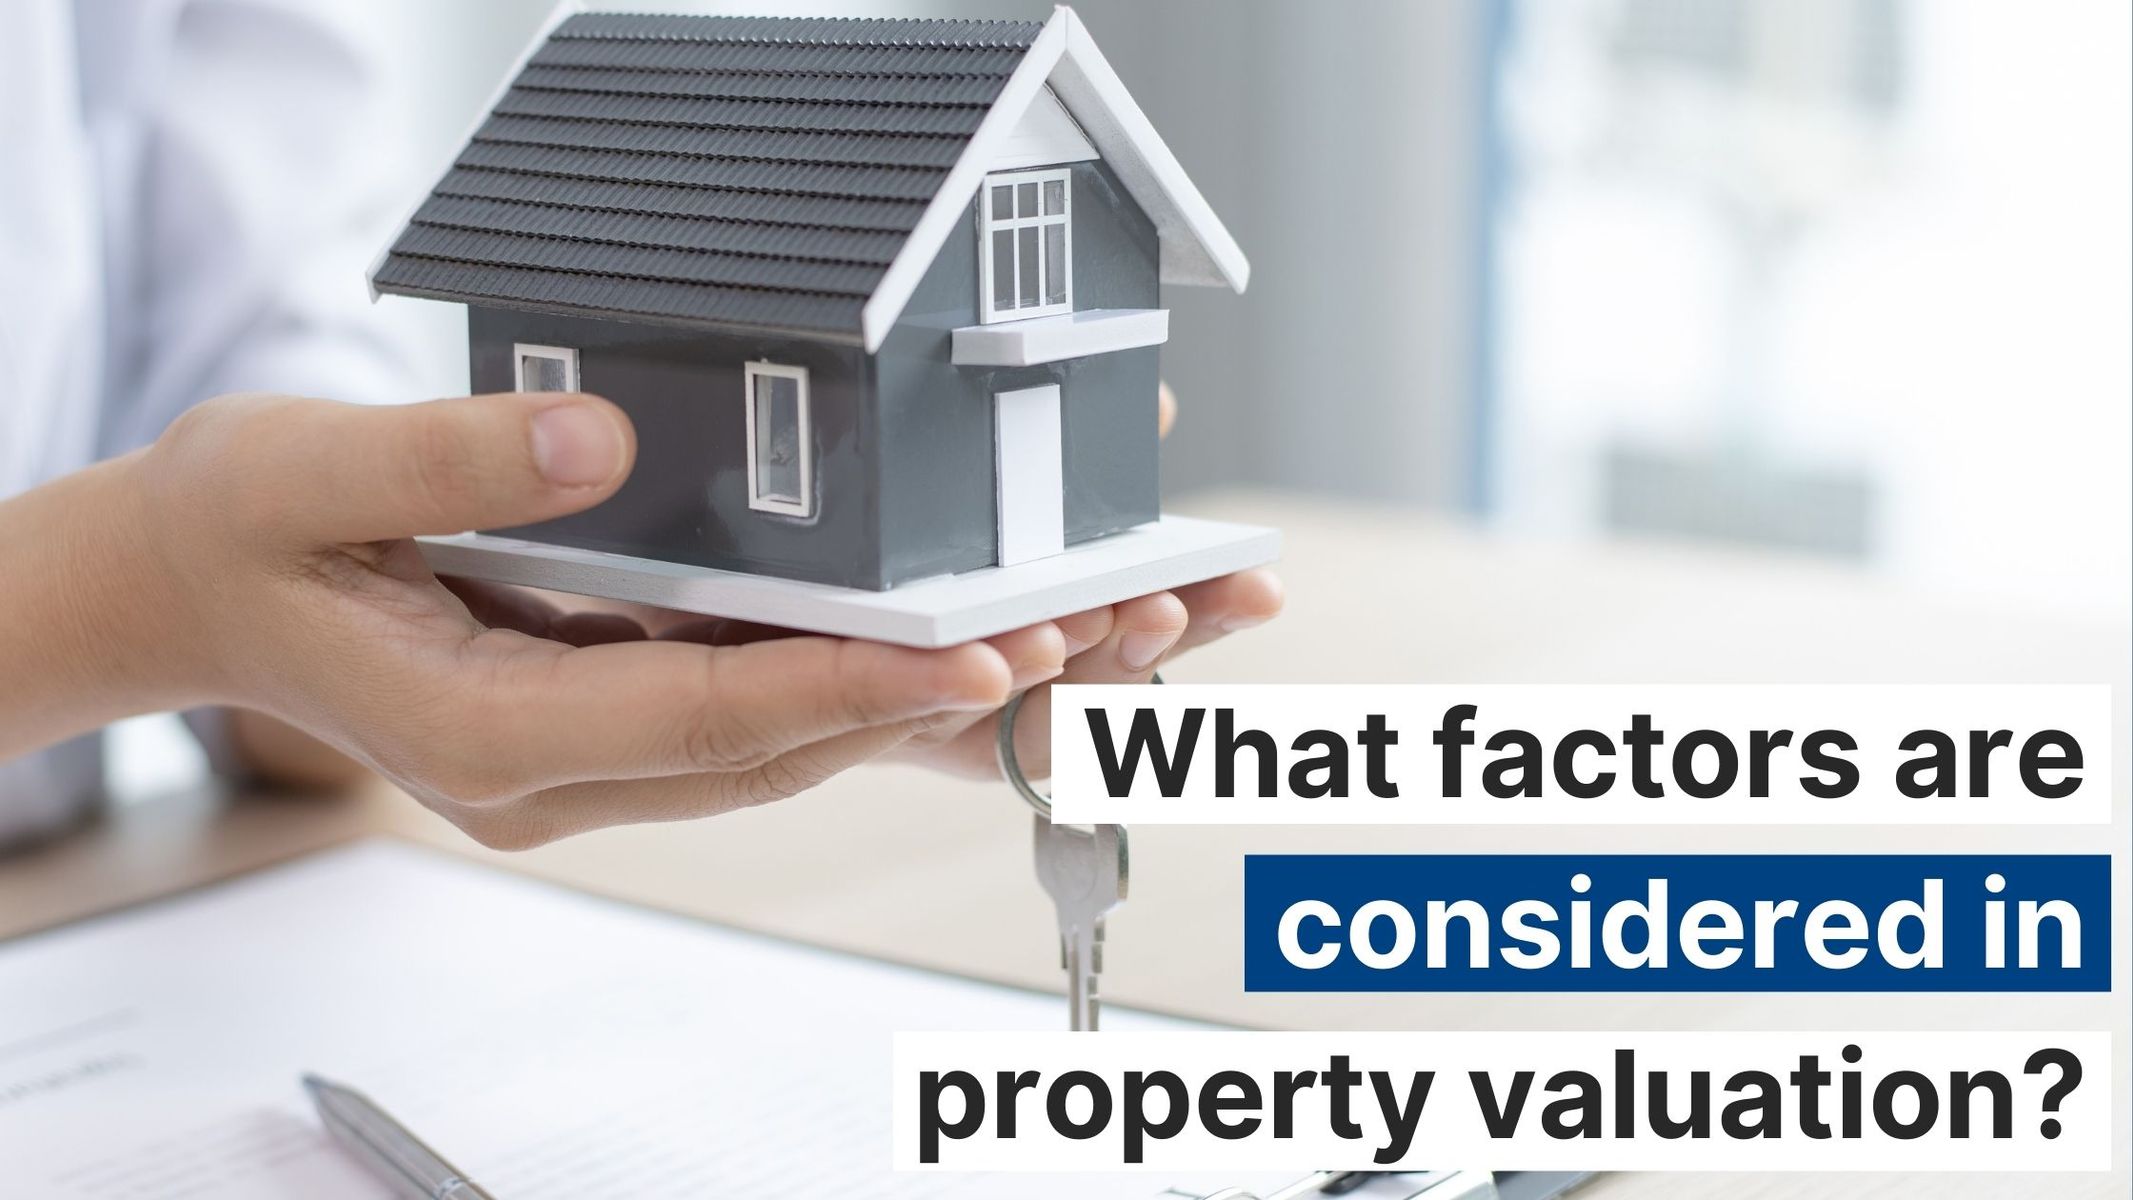 What factors are considered in property valuation?